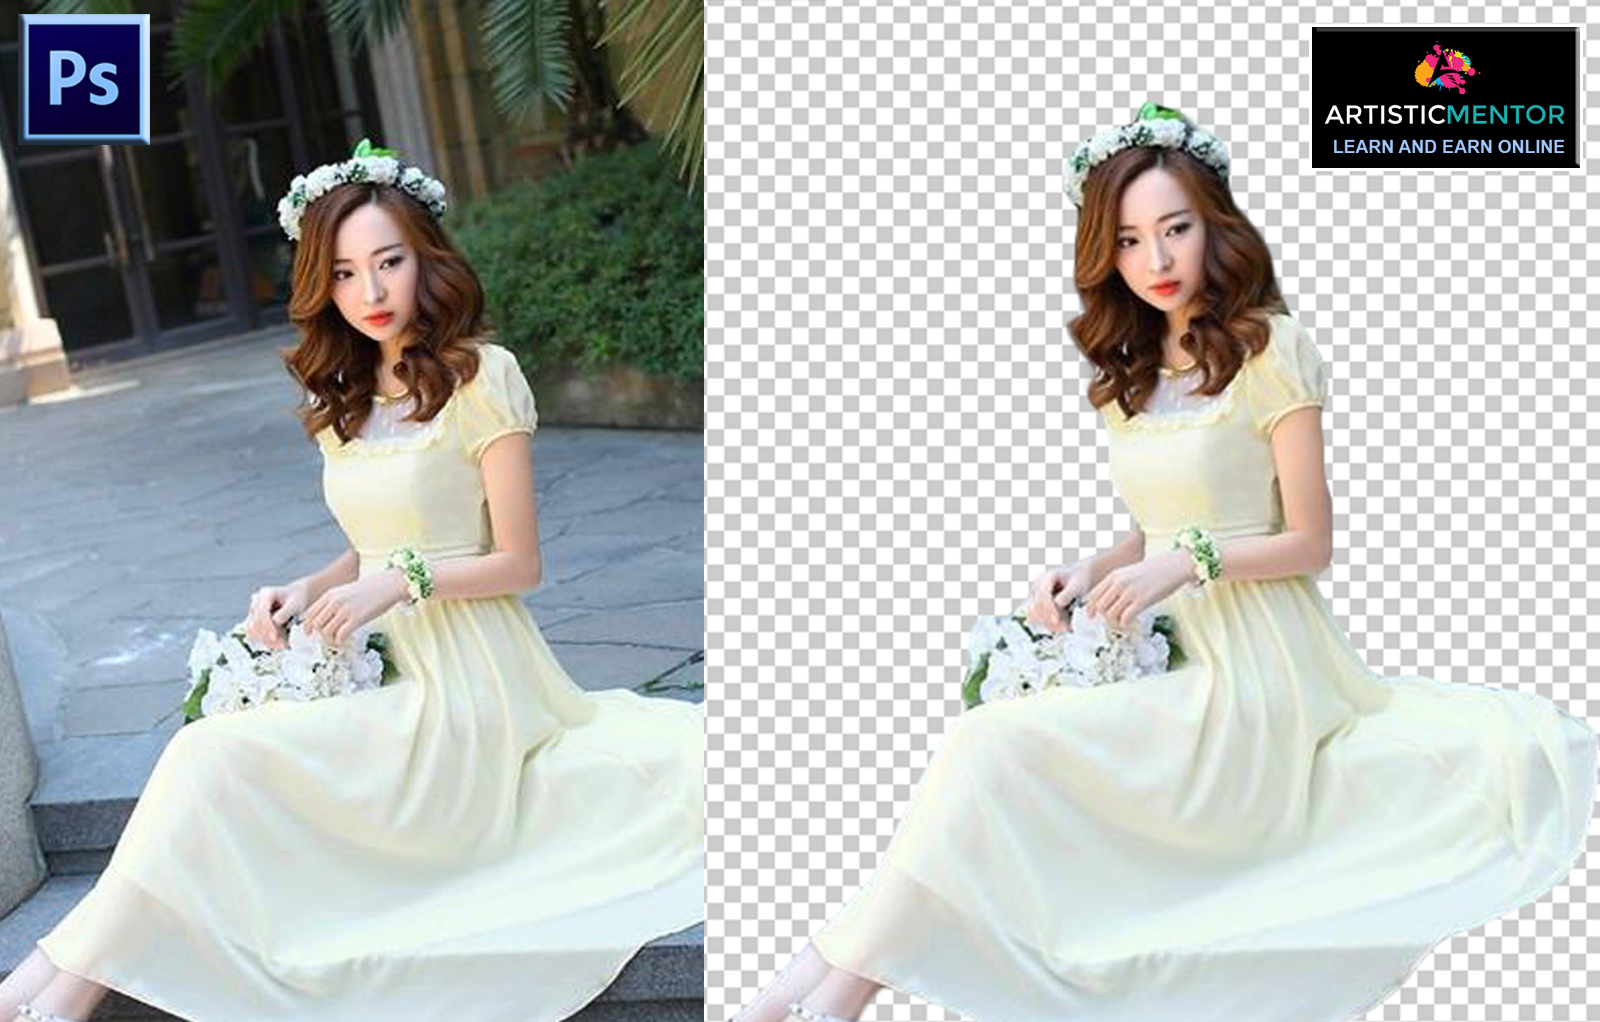 Remove Background in Photoshop CS6 in just 1 minute | Photoshop ...